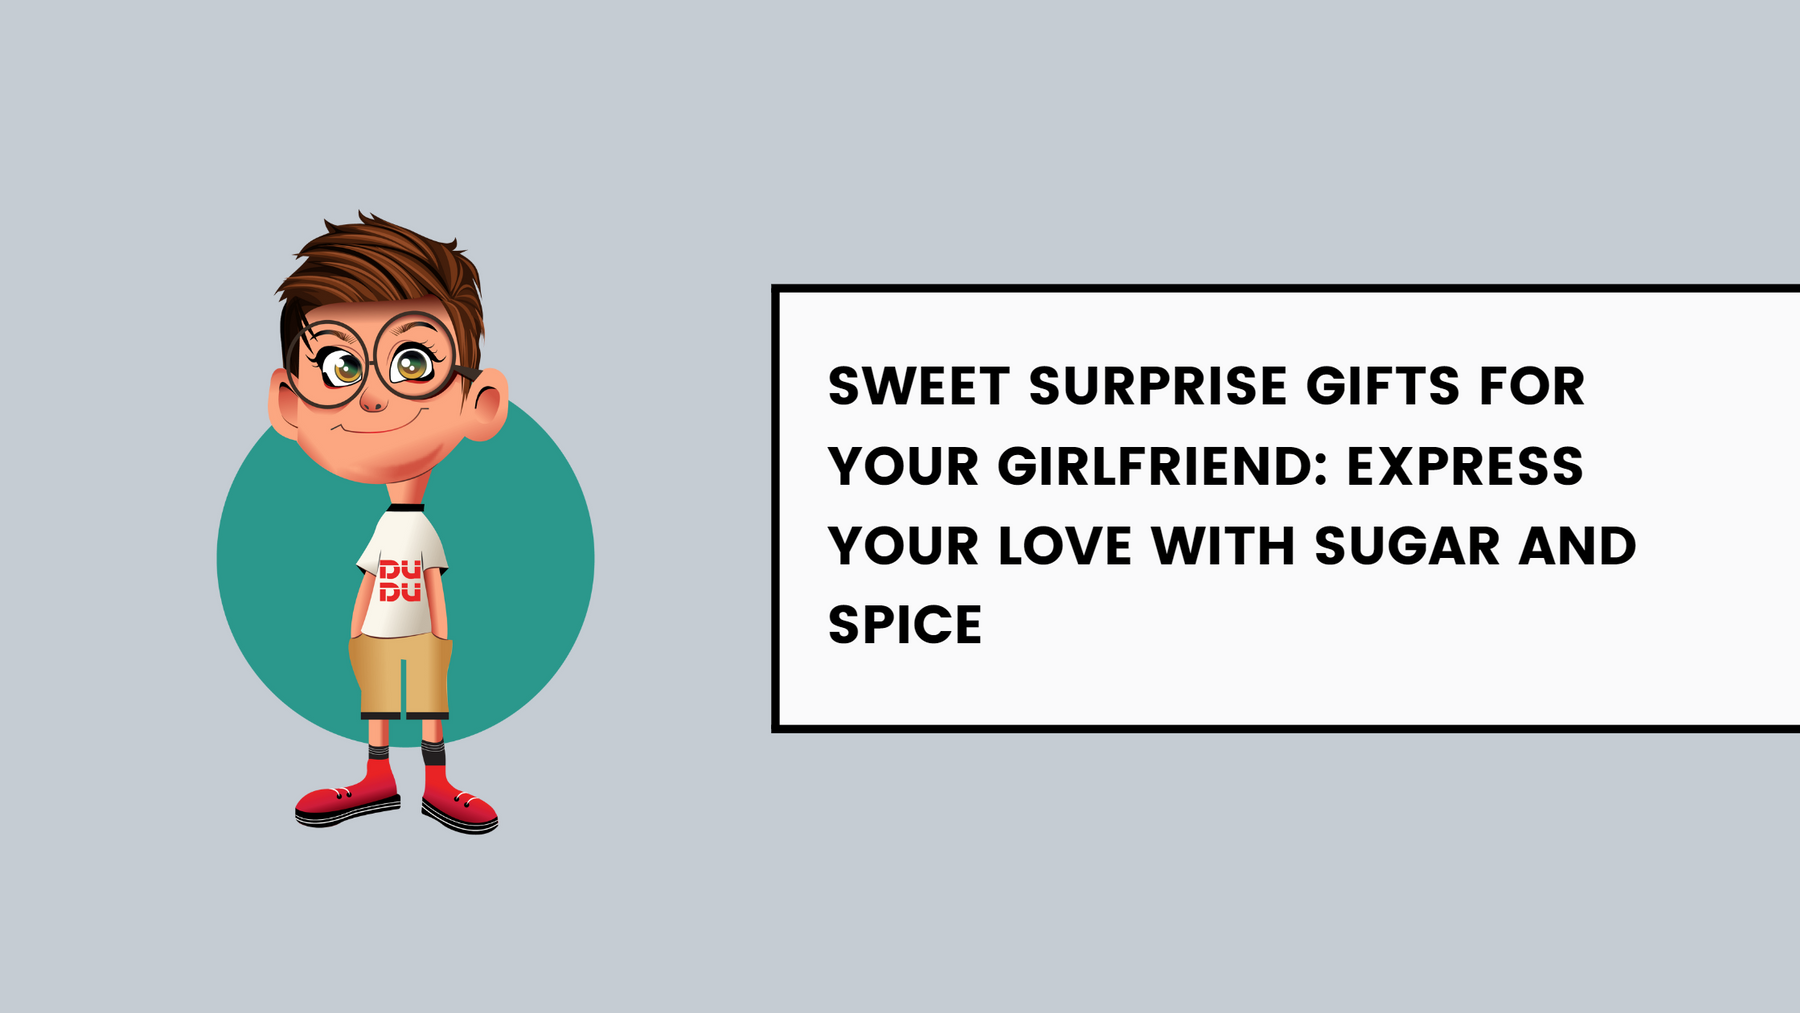 Sweet Surprise Gifts For Your Girlfriend: Express Your Love With Sugar And Spice